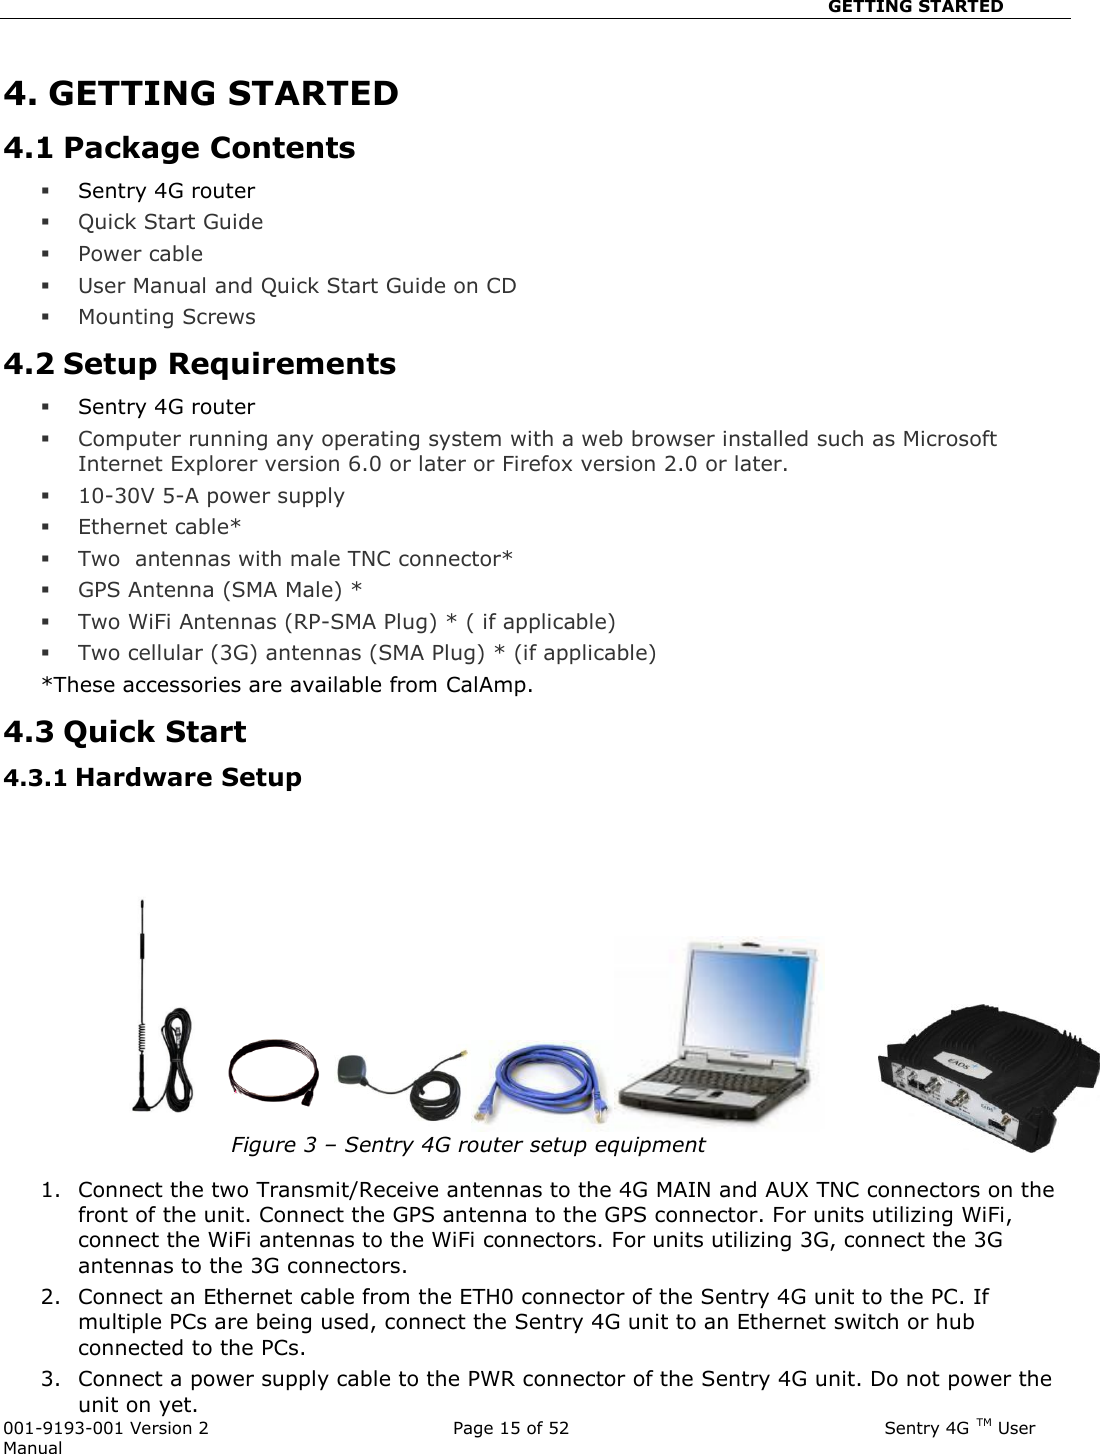                                                       GETTING STARTED  001-9193-001 Version 2              Page 15 of 52                              Sentry 4G TM User Manual 4. GETTING STARTED 4.1 Package Contents  Sentry 4G router  Quick Start Guide  Power cable   User Manual and Quick Start Guide on CD  Mounting Screws 4.2 Setup Requirements  Sentry 4G router   Computer running any operating system with a web browser installed such as Microsoft Internet Explorer version 6.0 or later or Firefox version 2.0 or later.   10-30V 5-A power supply   Ethernet cable*  Two  antennas with male TNC connector*   GPS Antenna (SMA Male) *  Two WiFi Antennas (RP-SMA Plug) * ( if applicable)  Two cellular (3G) antennas (SMA Plug) * (if applicable) *These accessories are available from CalAmp. 4.3 Quick Start 4.3.1 Hardware Setup     Figure 3 – Sentry 4G router setup equipment  1. Connect the two Transmit/Receive antennas to the 4G MAIN and AUX TNC connectors on the front of the unit. Connect the GPS antenna to the GPS connector. For units utilizing WiFi, connect the WiFi antennas to the WiFi connectors. For units utilizing 3G, connect the 3G antennas to the 3G connectors. 2. Connect an Ethernet cable from the ETH0 connector of the Sentry 4G unit to the PC. If multiple PCs are being used, connect the Sentry 4G unit to an Ethernet switch or hub connected to the PCs.   3. Connect a power supply cable to the PWR connector of the Sentry 4G unit. Do not power the unit on yet. 